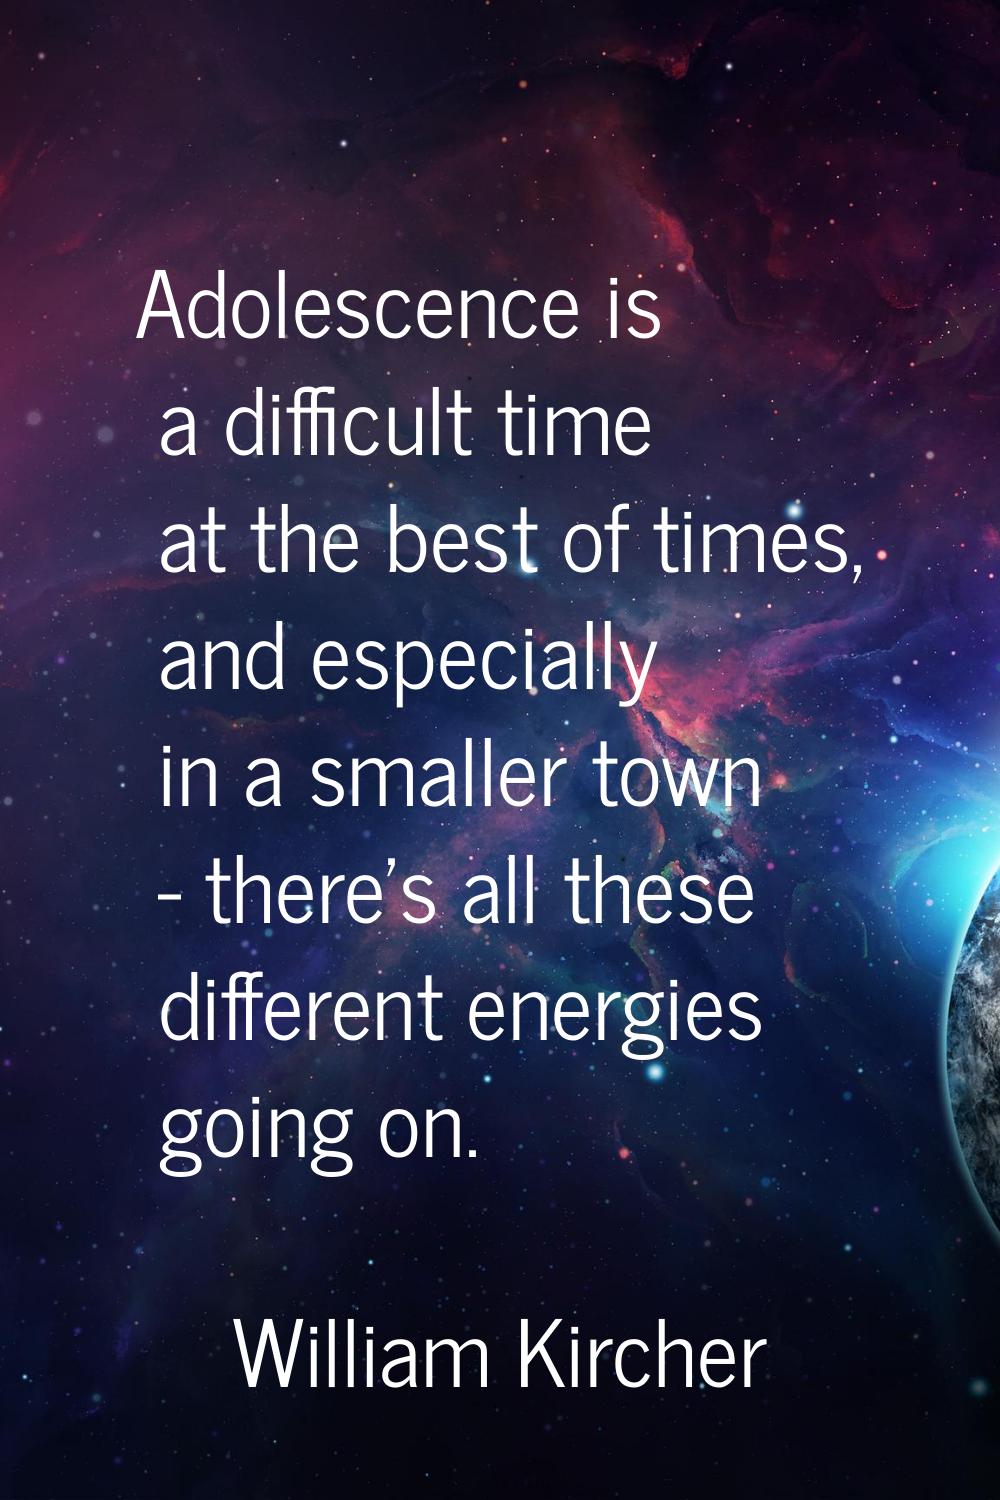 Adolescence is a difficult time at the best of times, and especially in a smaller town - there's al